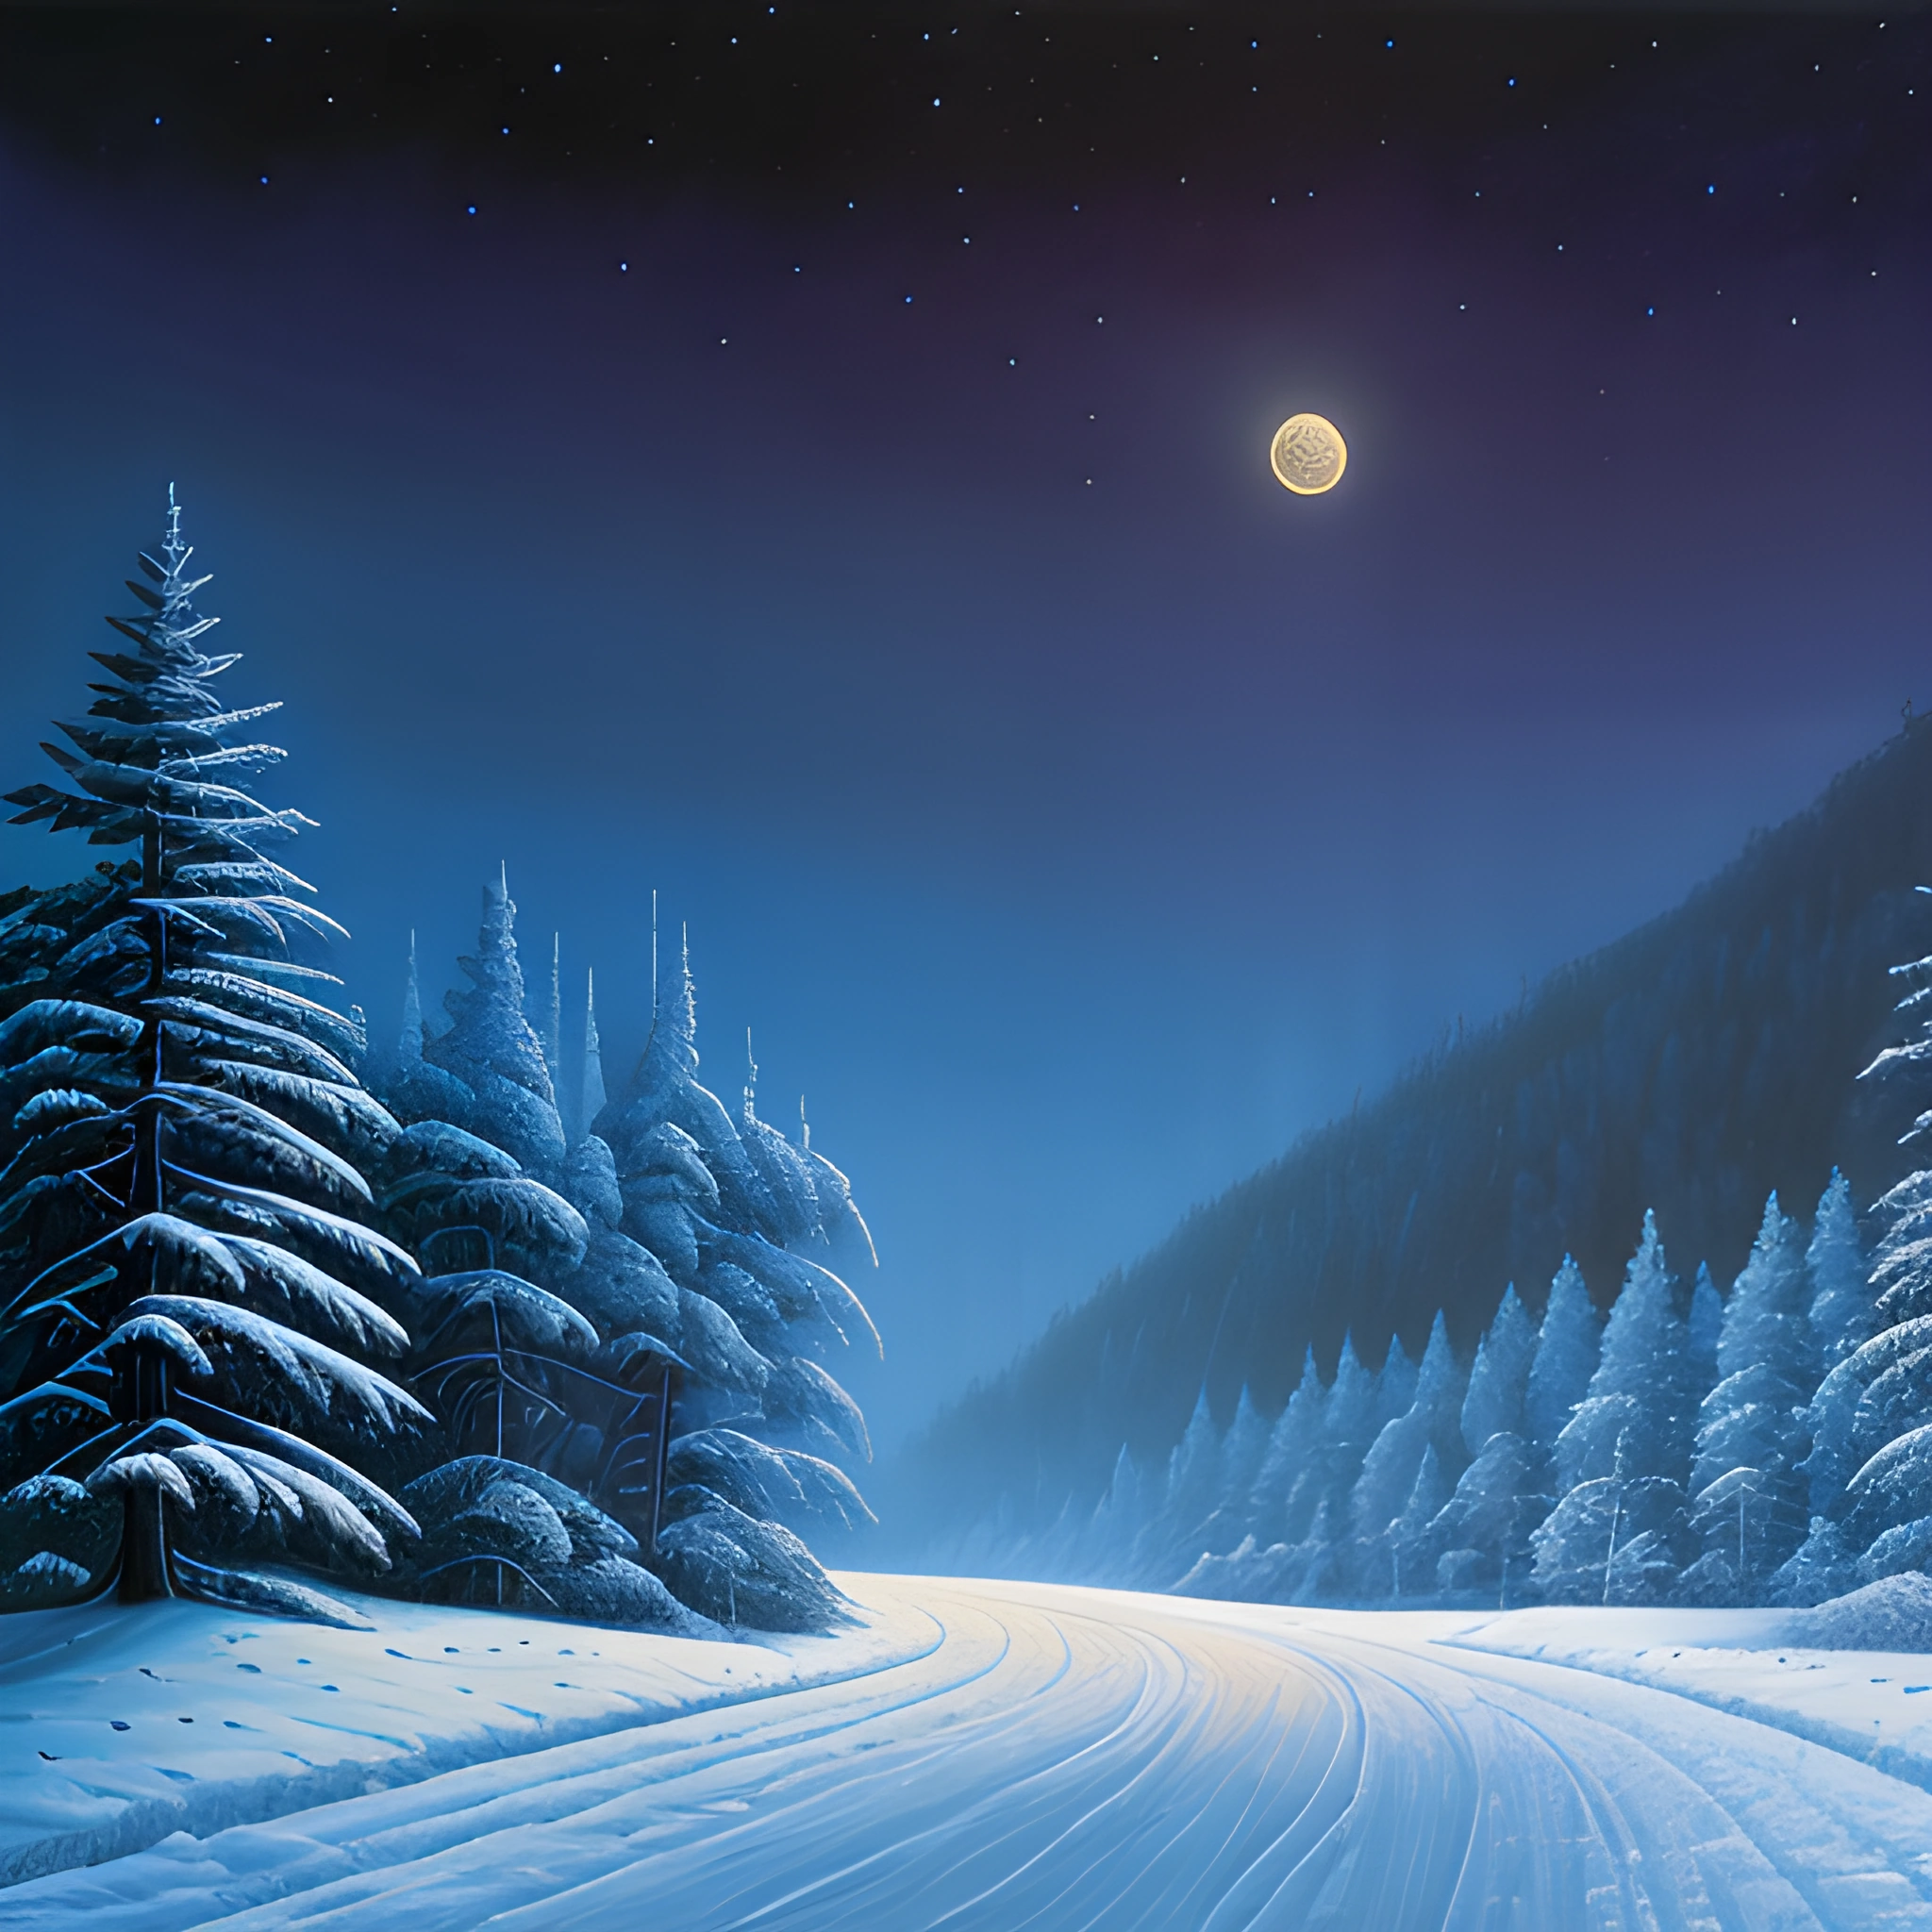 snowy road in the night with a full moon in the sky